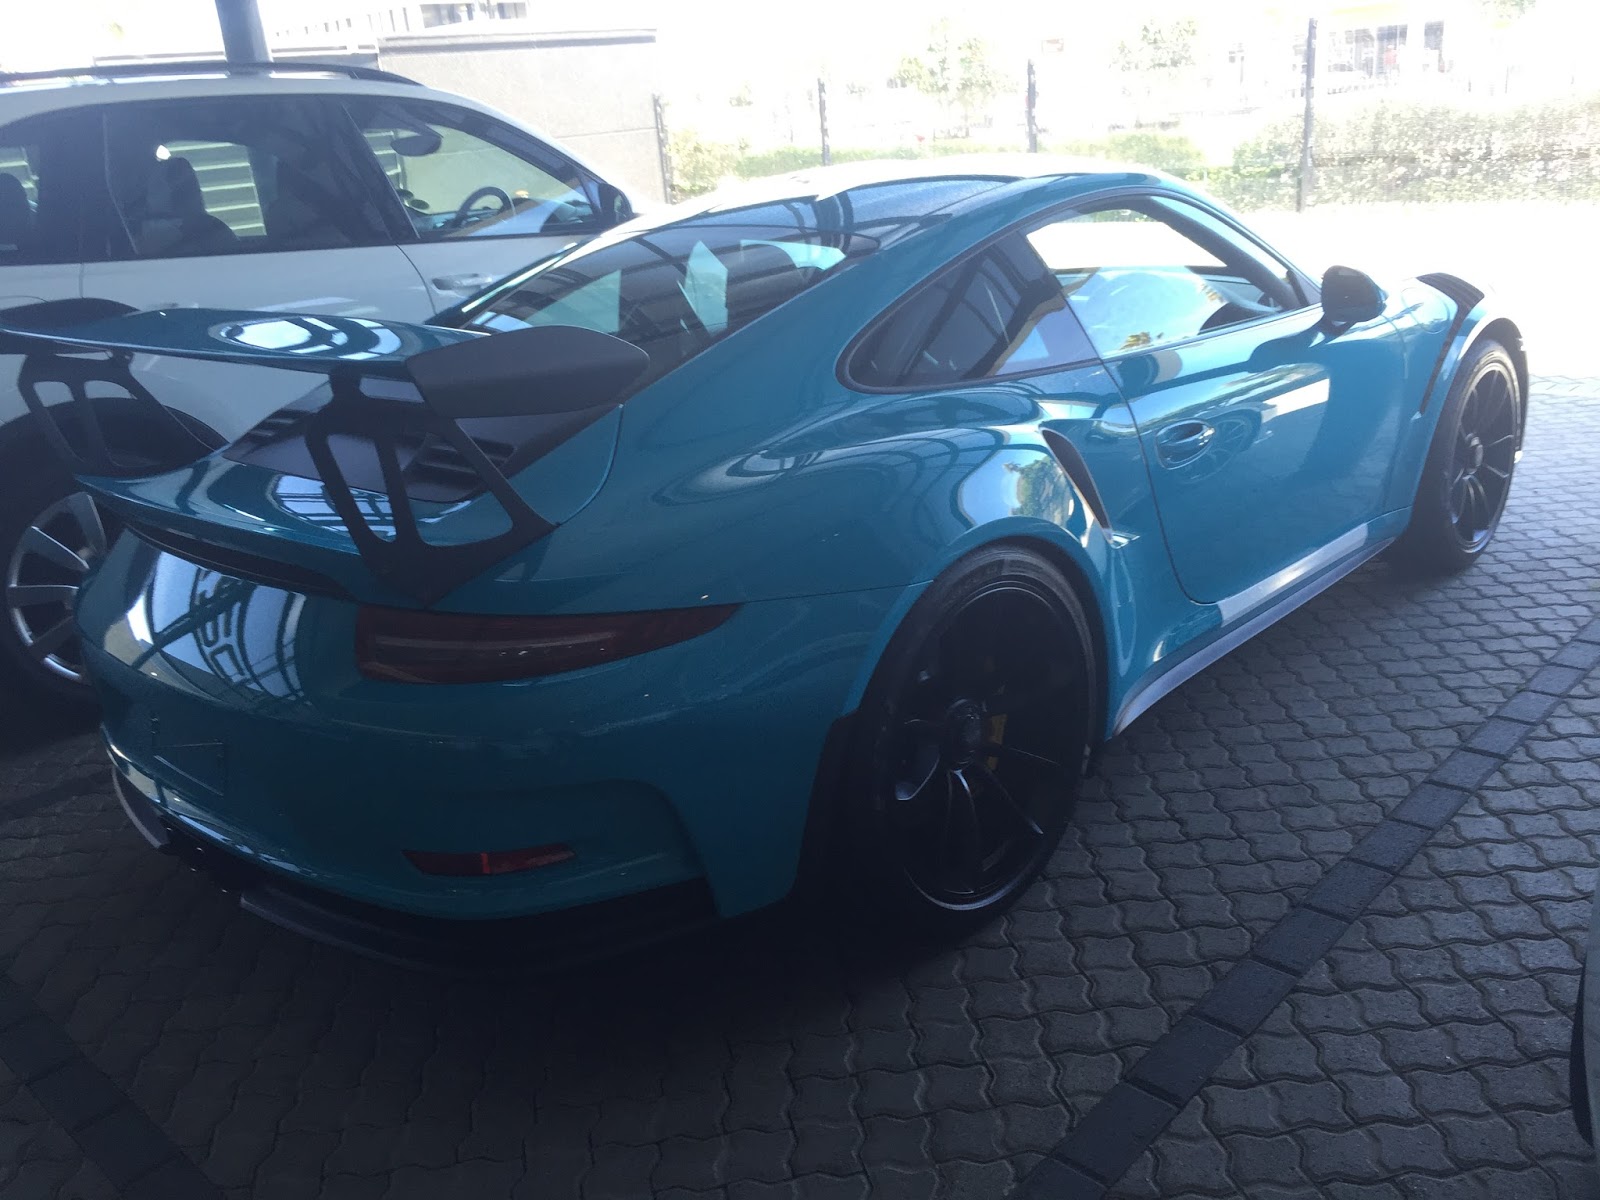 Miami Blue Porsche 991 Gt3 Rs Arrives In Cape Town South Africa